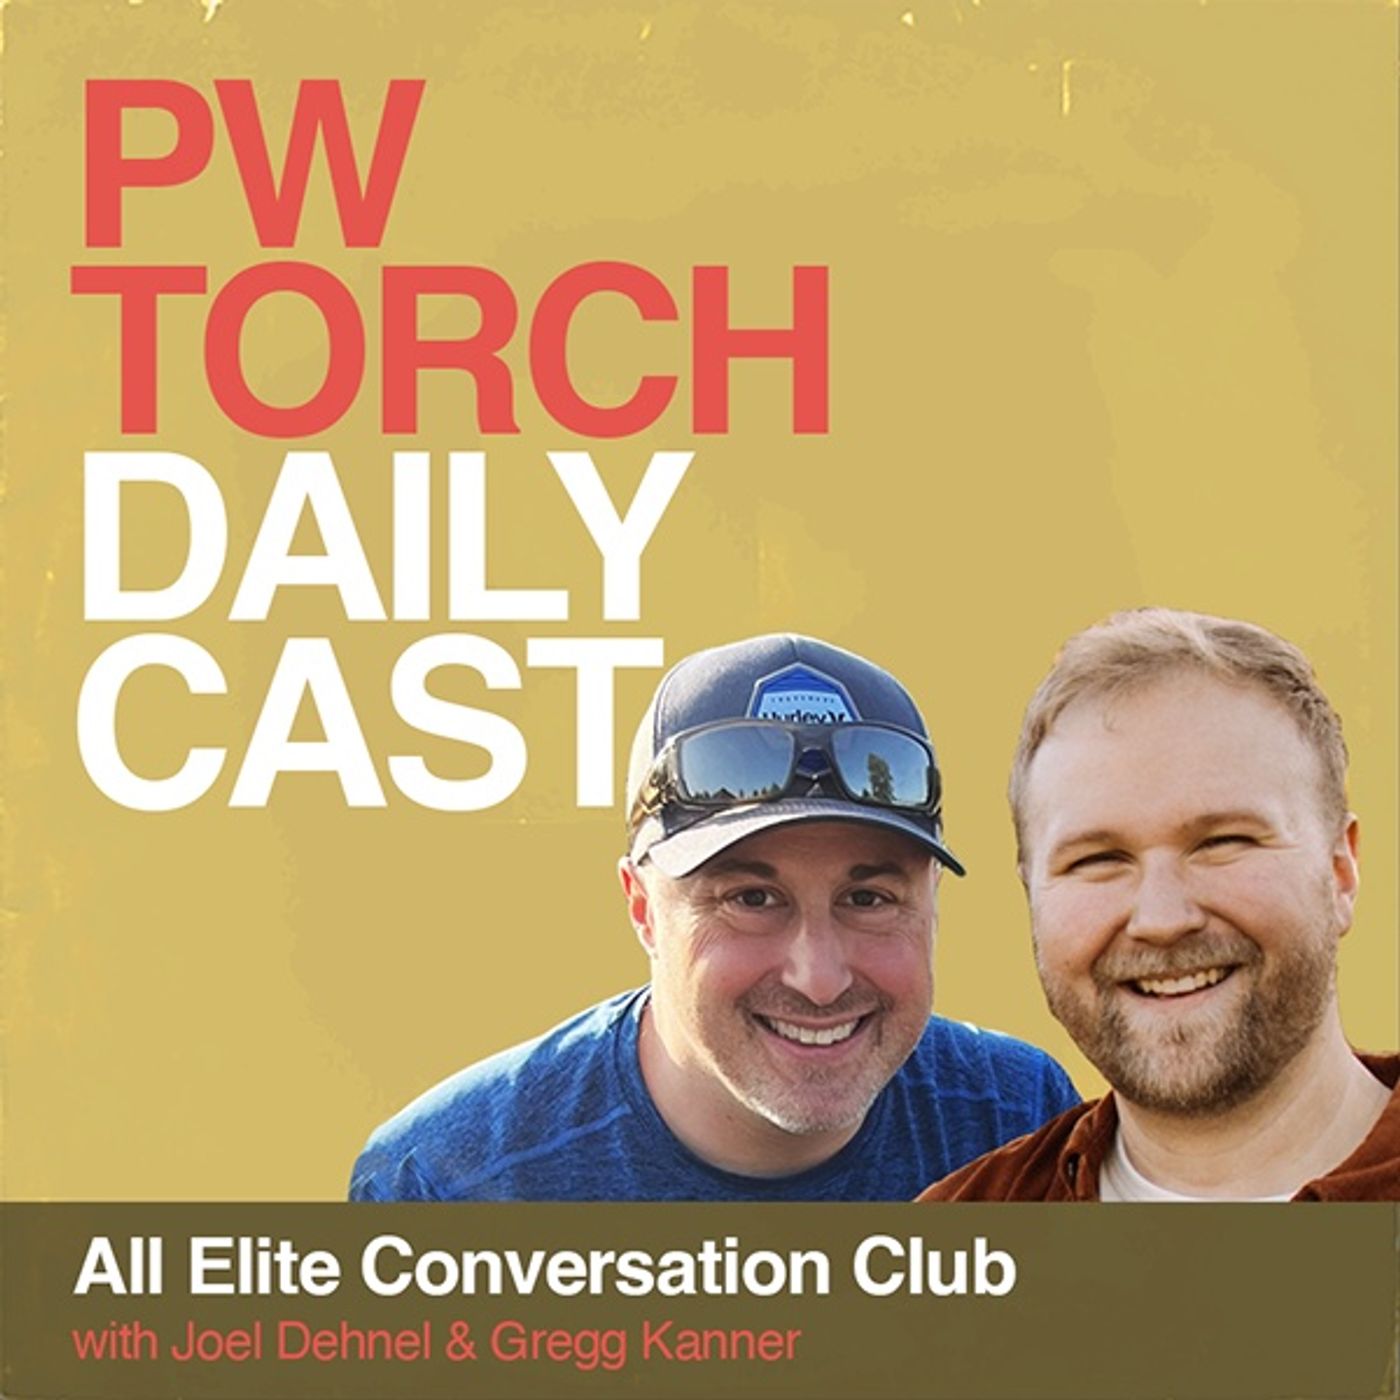 All Elite Conversation Club - Dehnel & Kanner assess Swerve Strickland push and usage as World Champion, cover Dynamite and hit news items